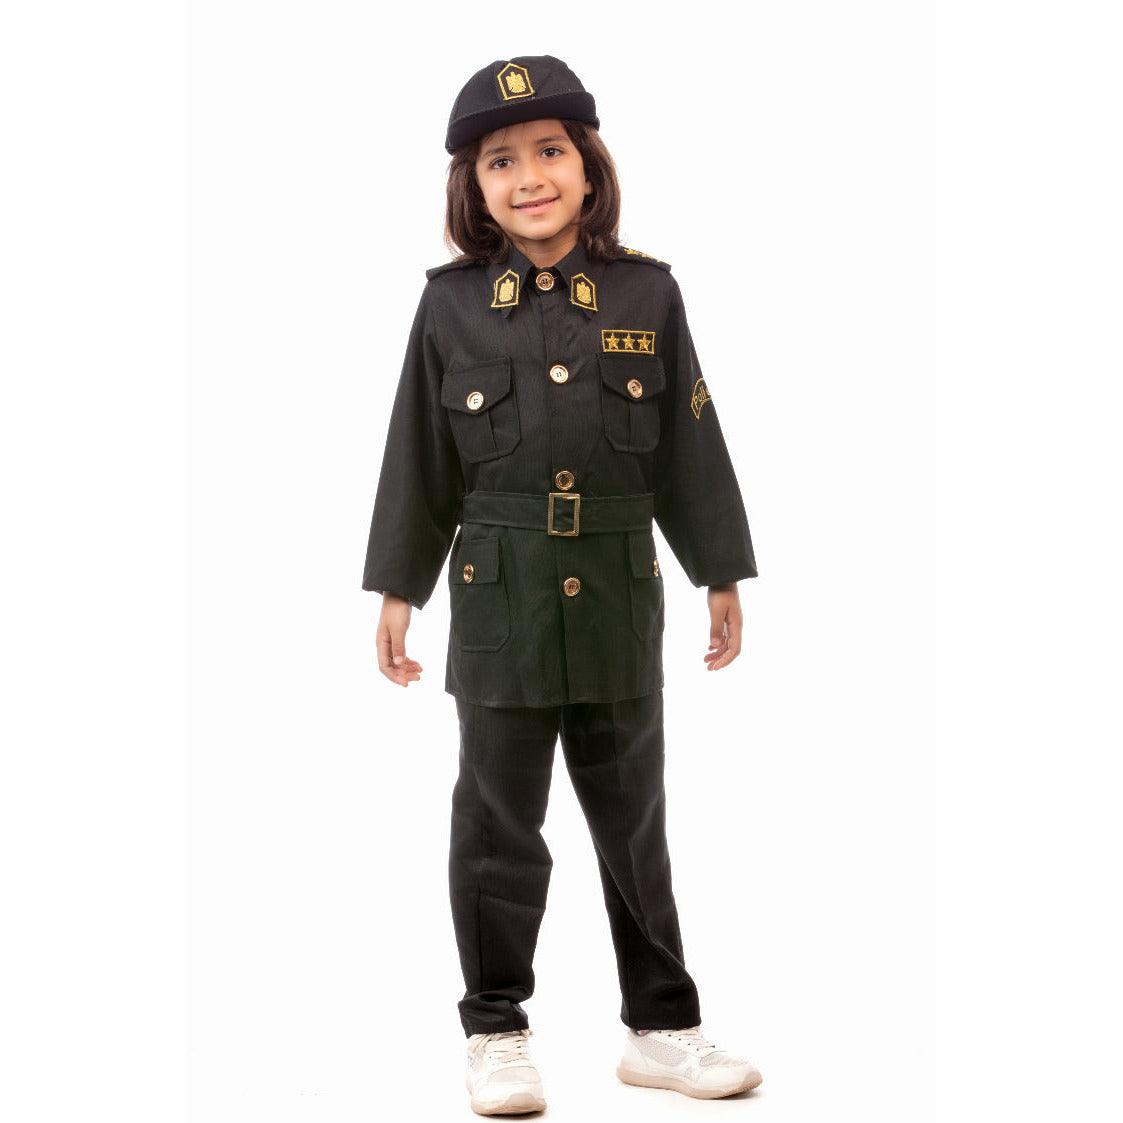 Policeman Costume - Black - Ourkids - M&A